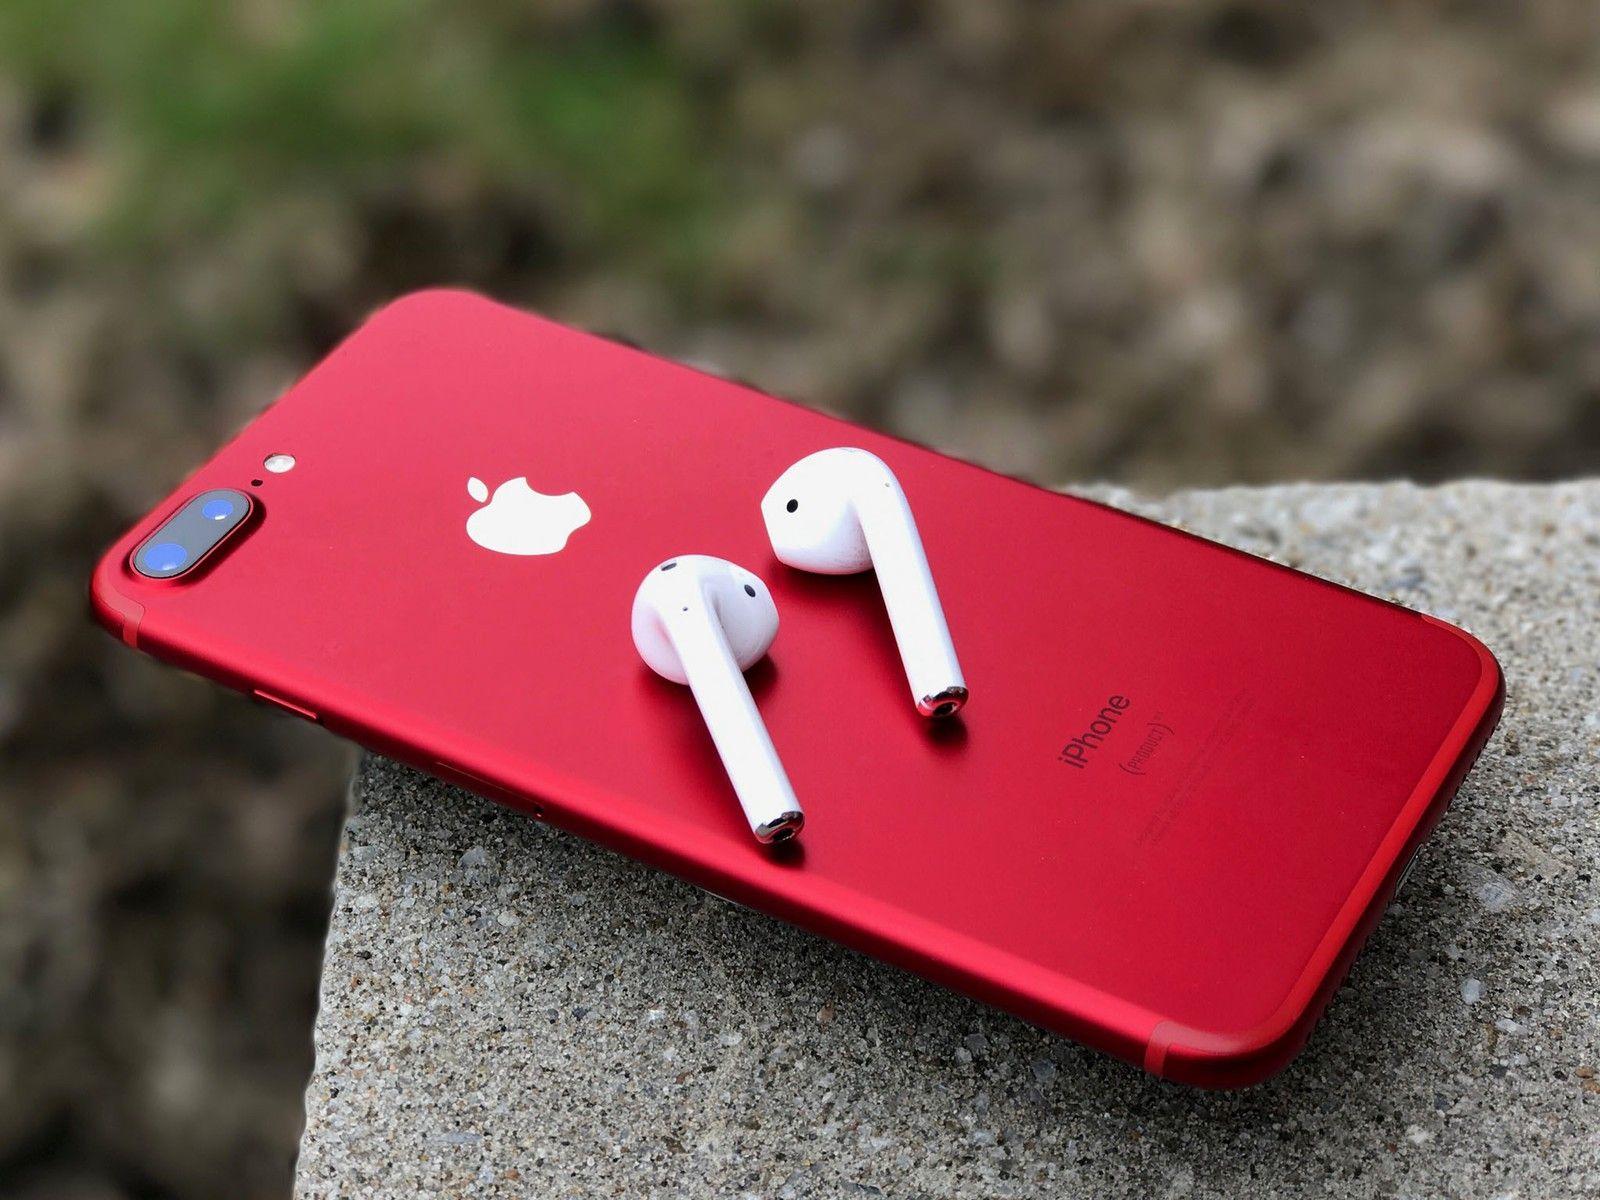 Silver On a Red Hand Logo - iPhone 8 color: Should you get silver, gold, space gray, or Product